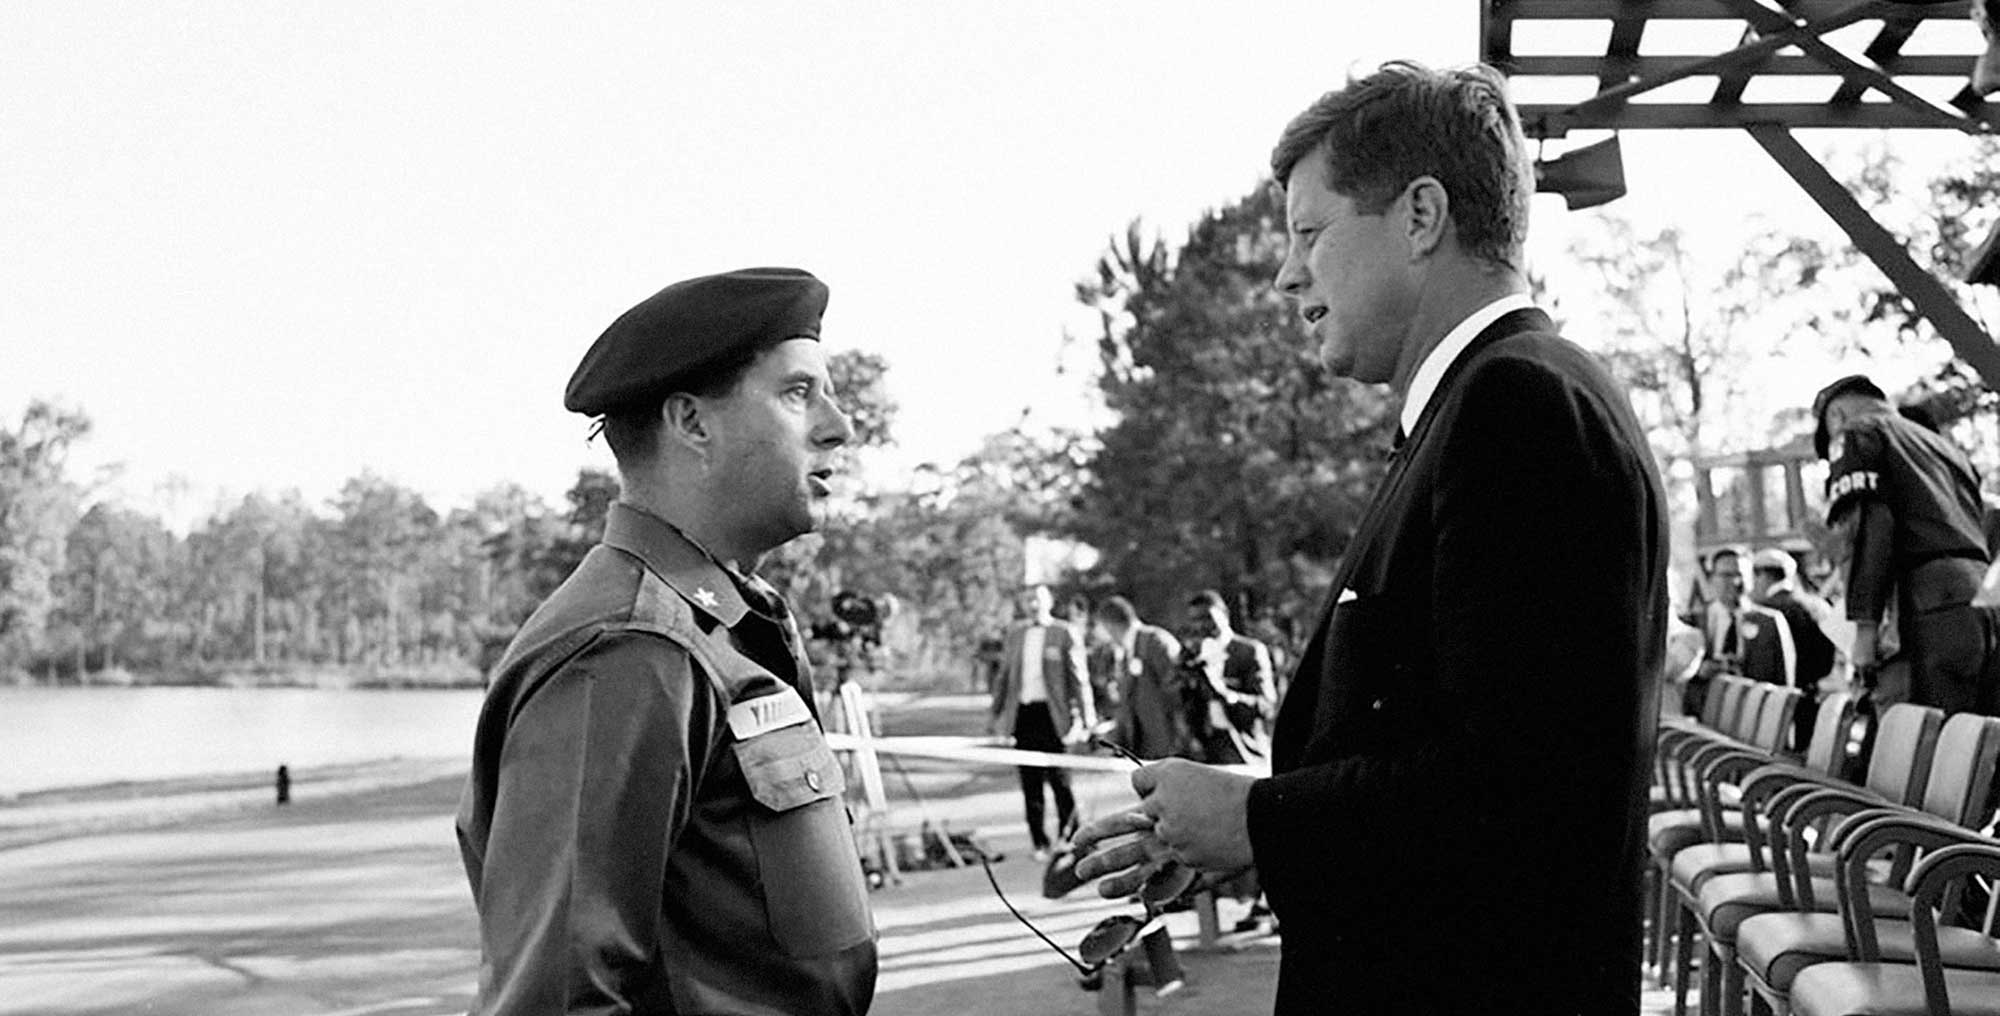 JFK meets Brigadier General William P. Yarborough, Commanding General, U.S. Army Special Warfare Center, during his visit to Fort Bragg, NC, in October 1961.